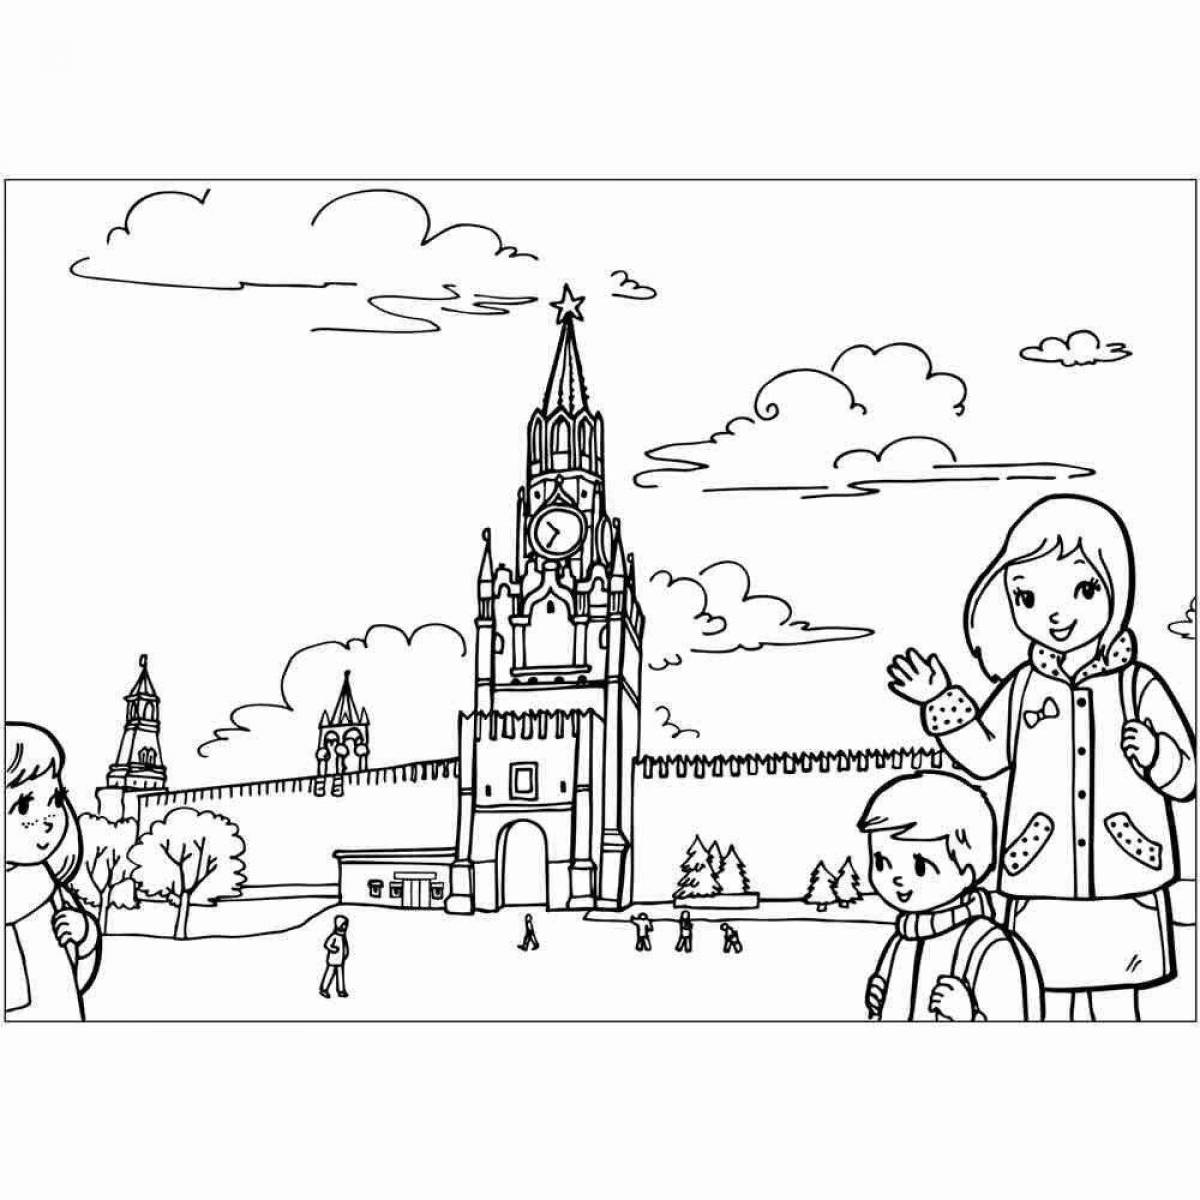 A fascinating drawing of the Kremlin for children